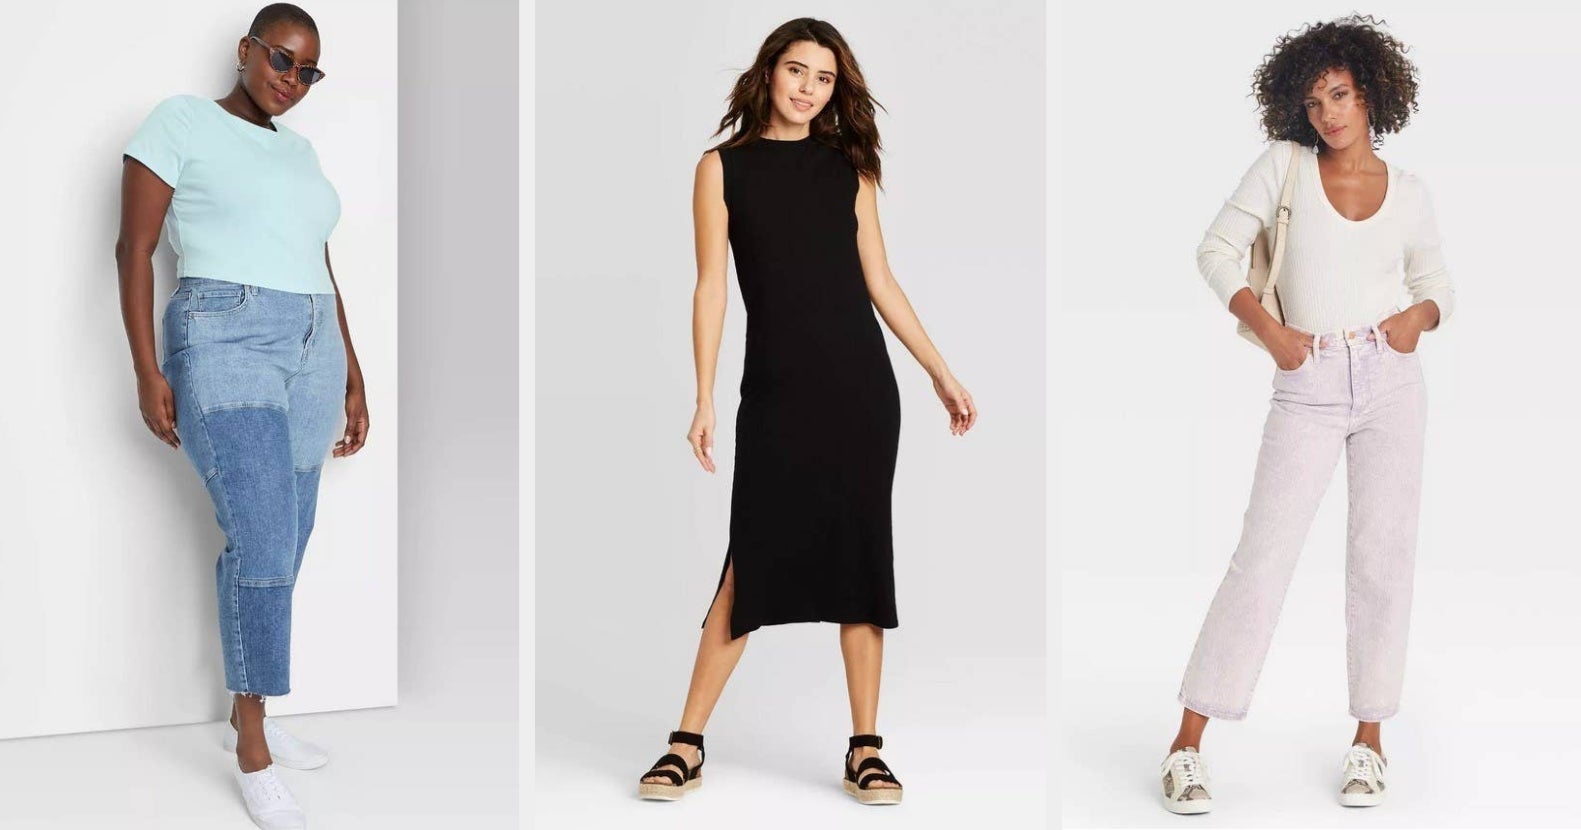 31 Style Items From Target With 100+ 5-Star Reviews